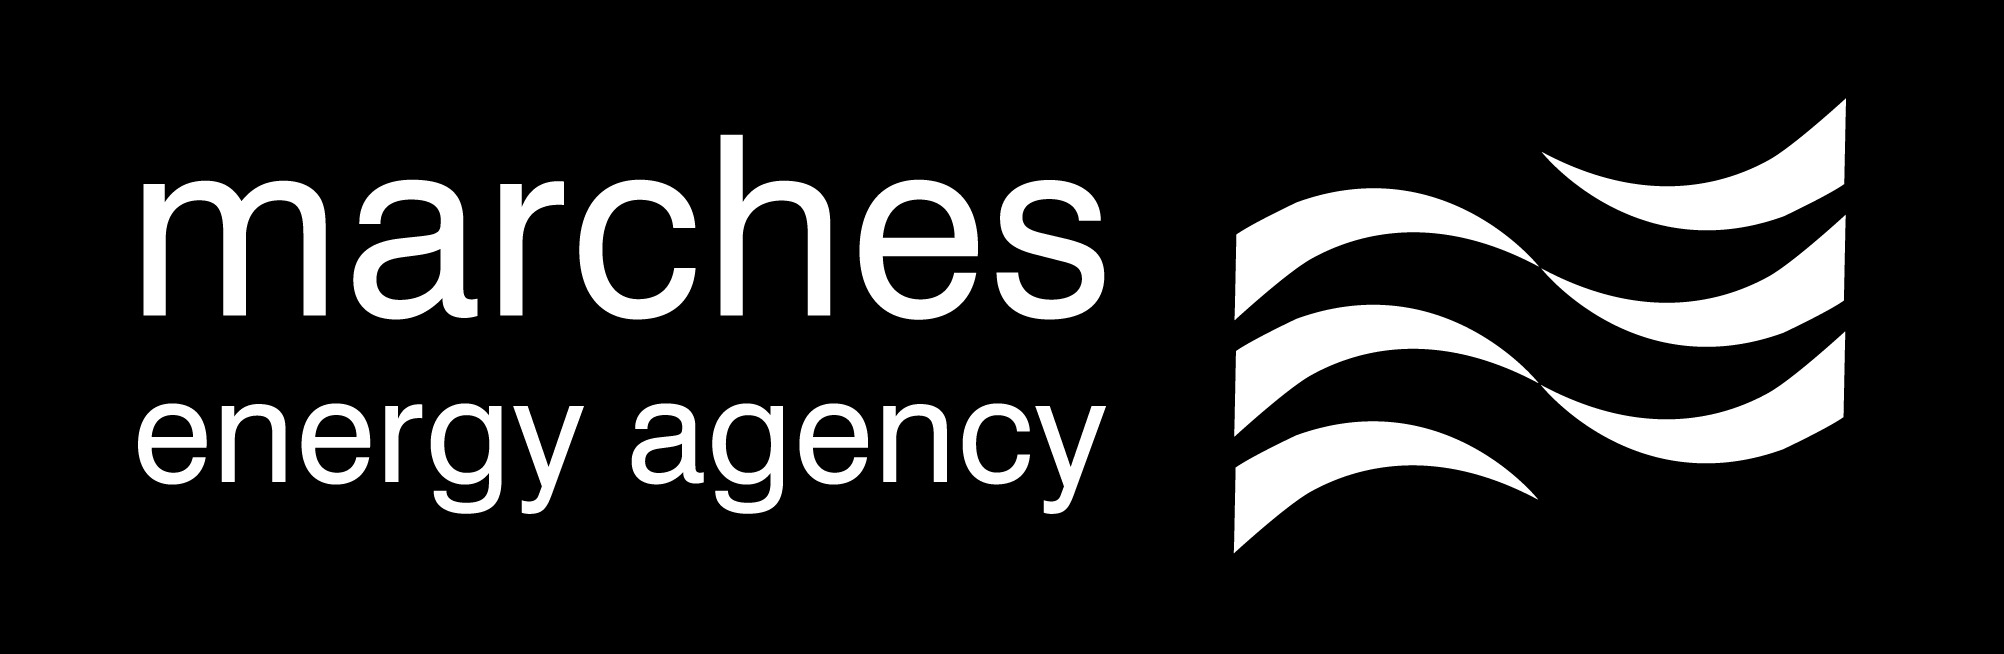 Marches Energy Agency logo